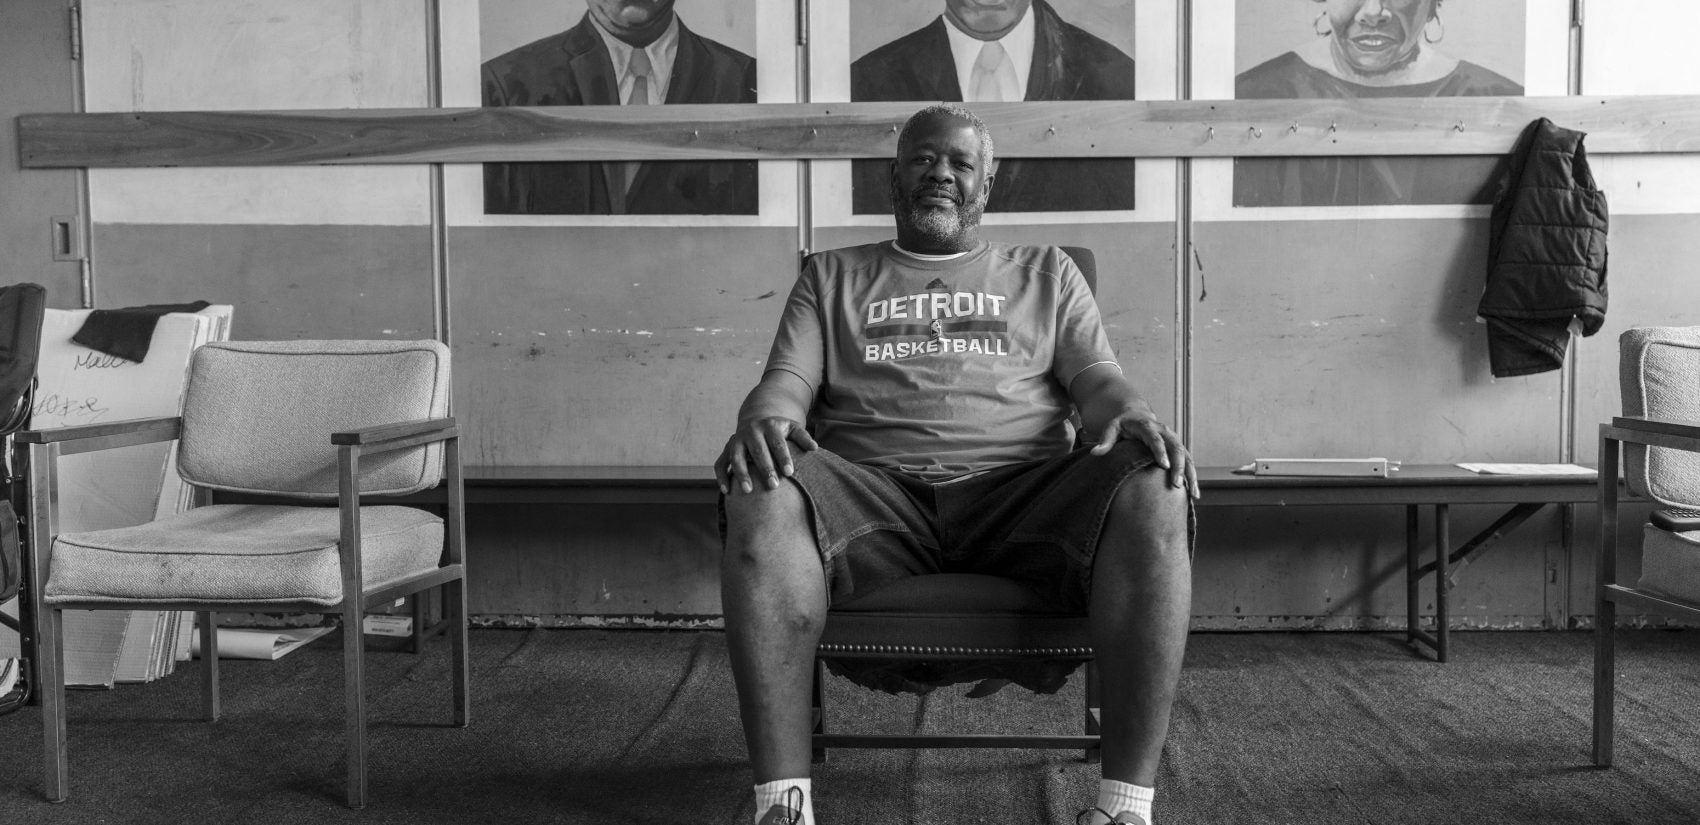 Jimmy Richardson, who often wears t-shirts of the teams the Morris twins have played on, has worked at Gathers since 1991. “I know a lot of the kids are going through some issues. I just talk to them and let them know it can get better...trouble is easy to get into and hard to get out of.” (Jessica Kourkounis for Keystone Crossroads)